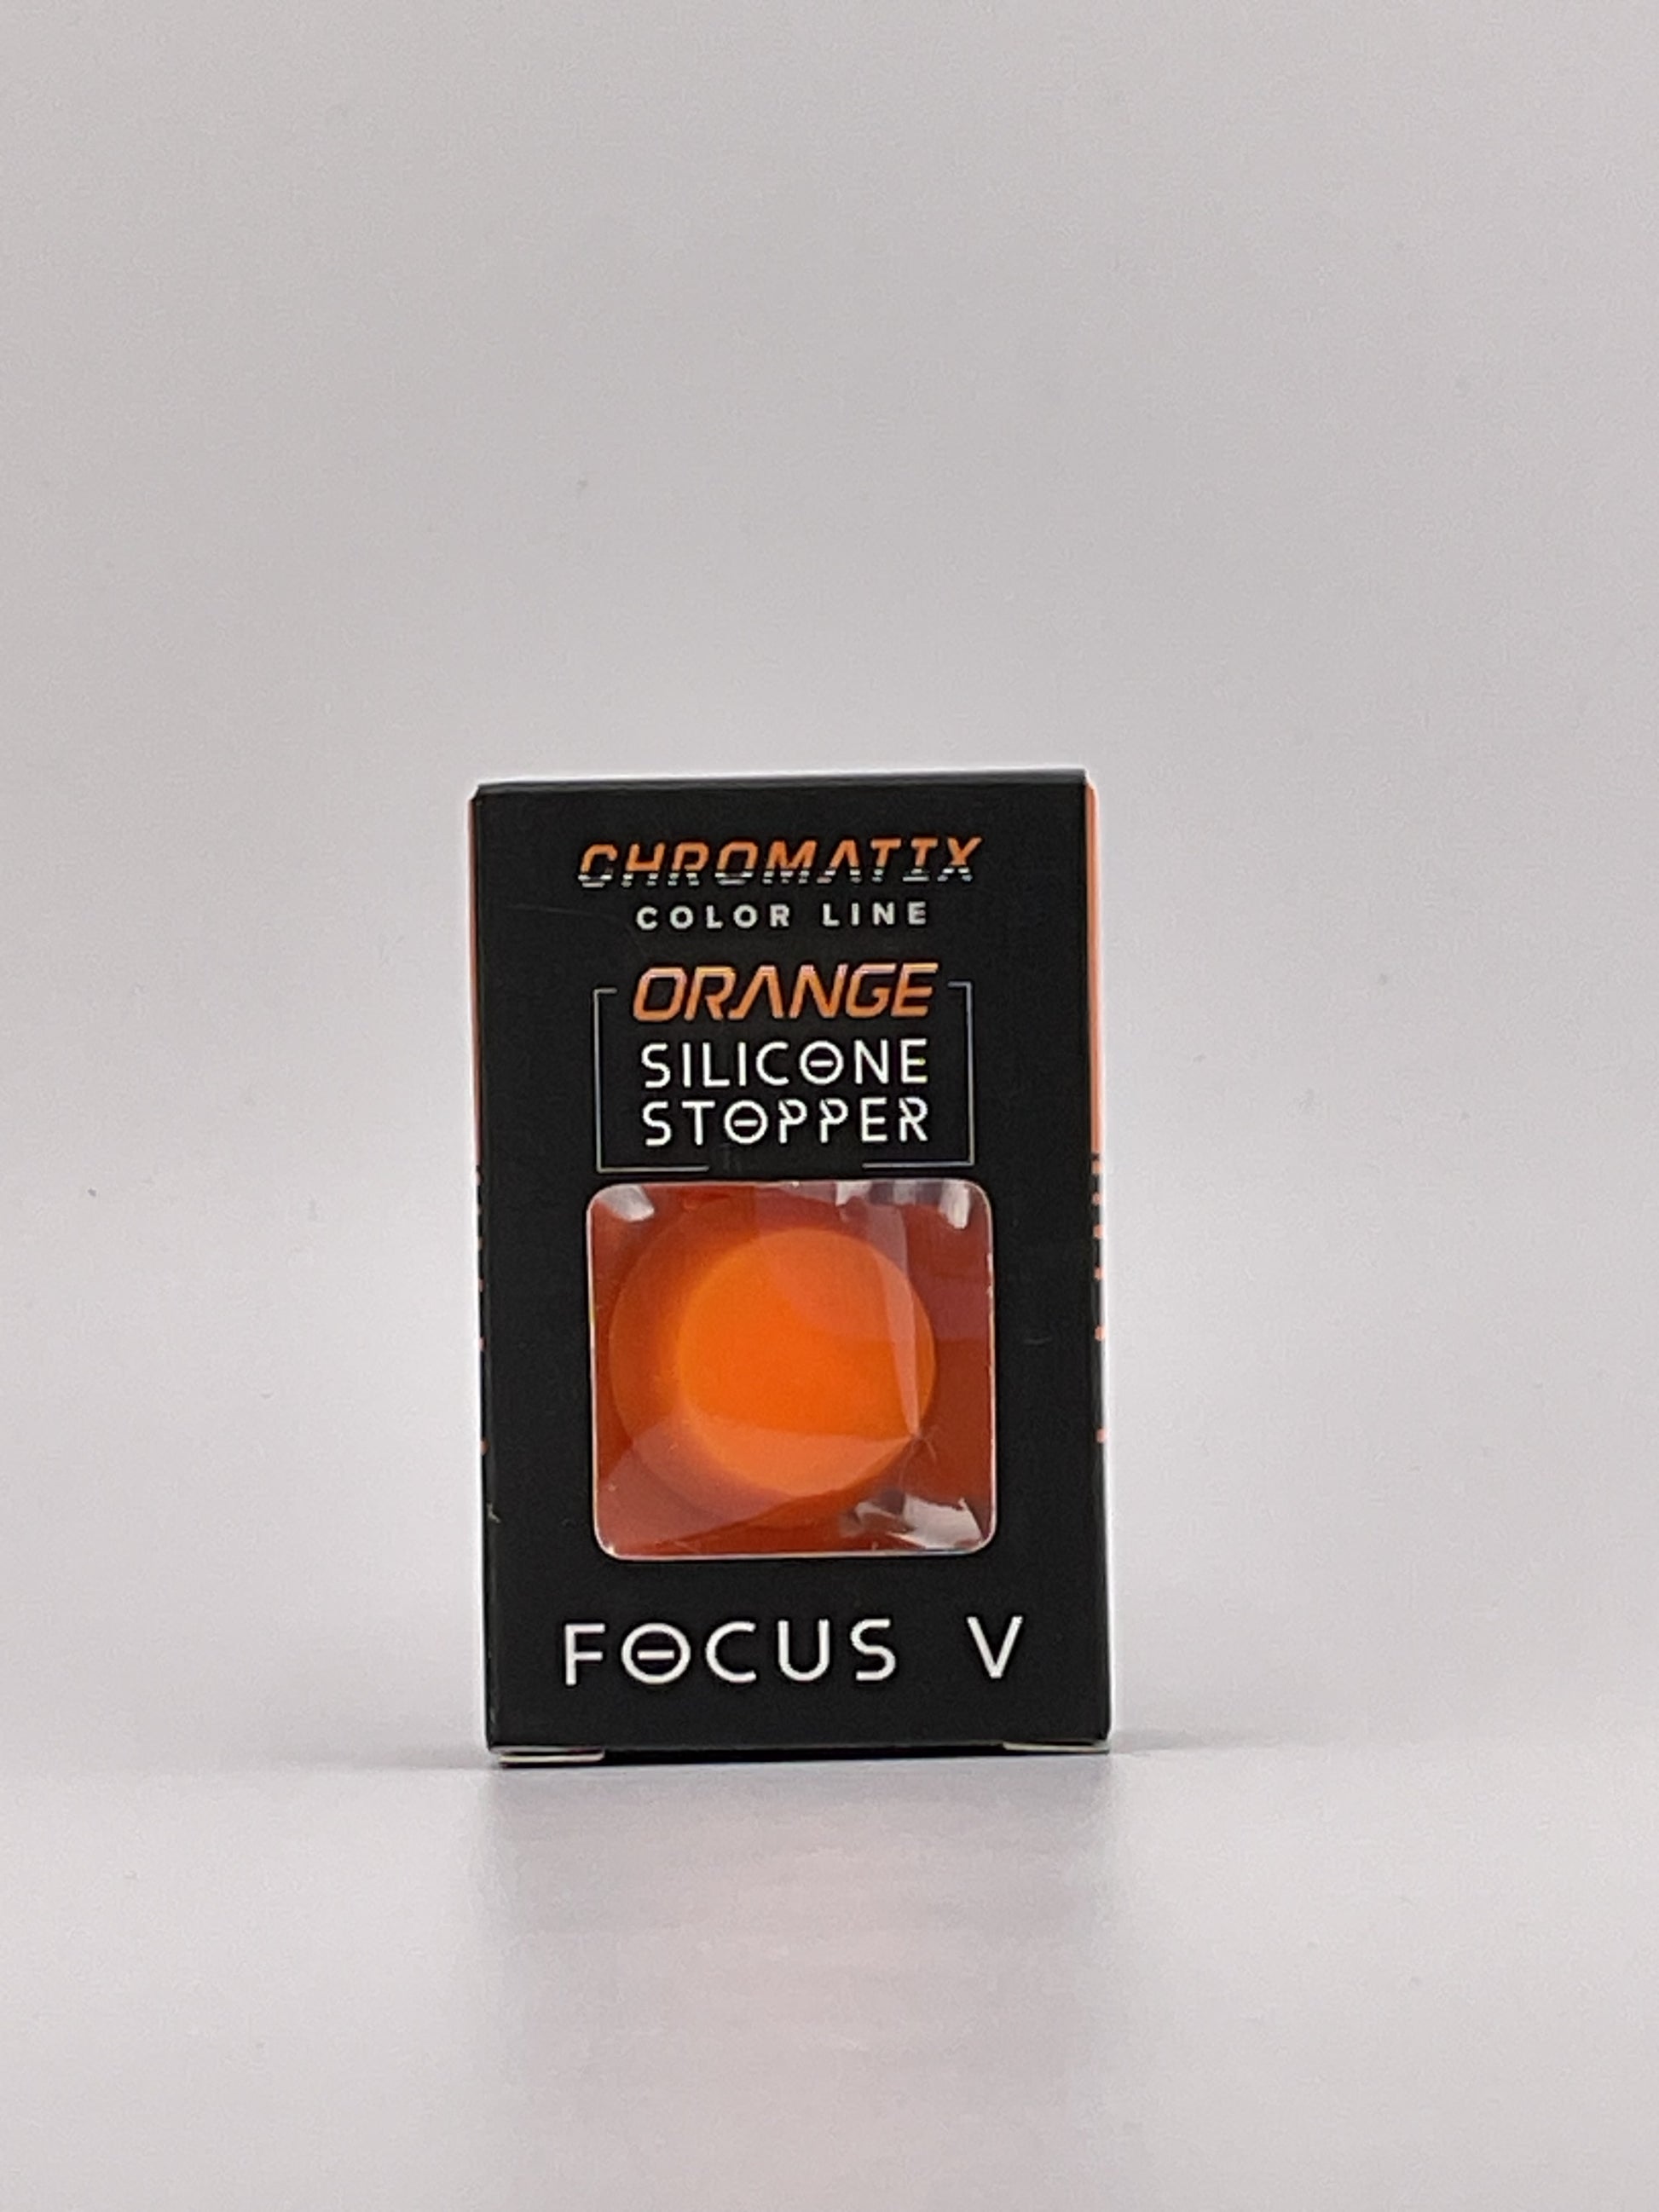 Carta focus V Orange silicone stopper

Available for pickup in post falls Idaho